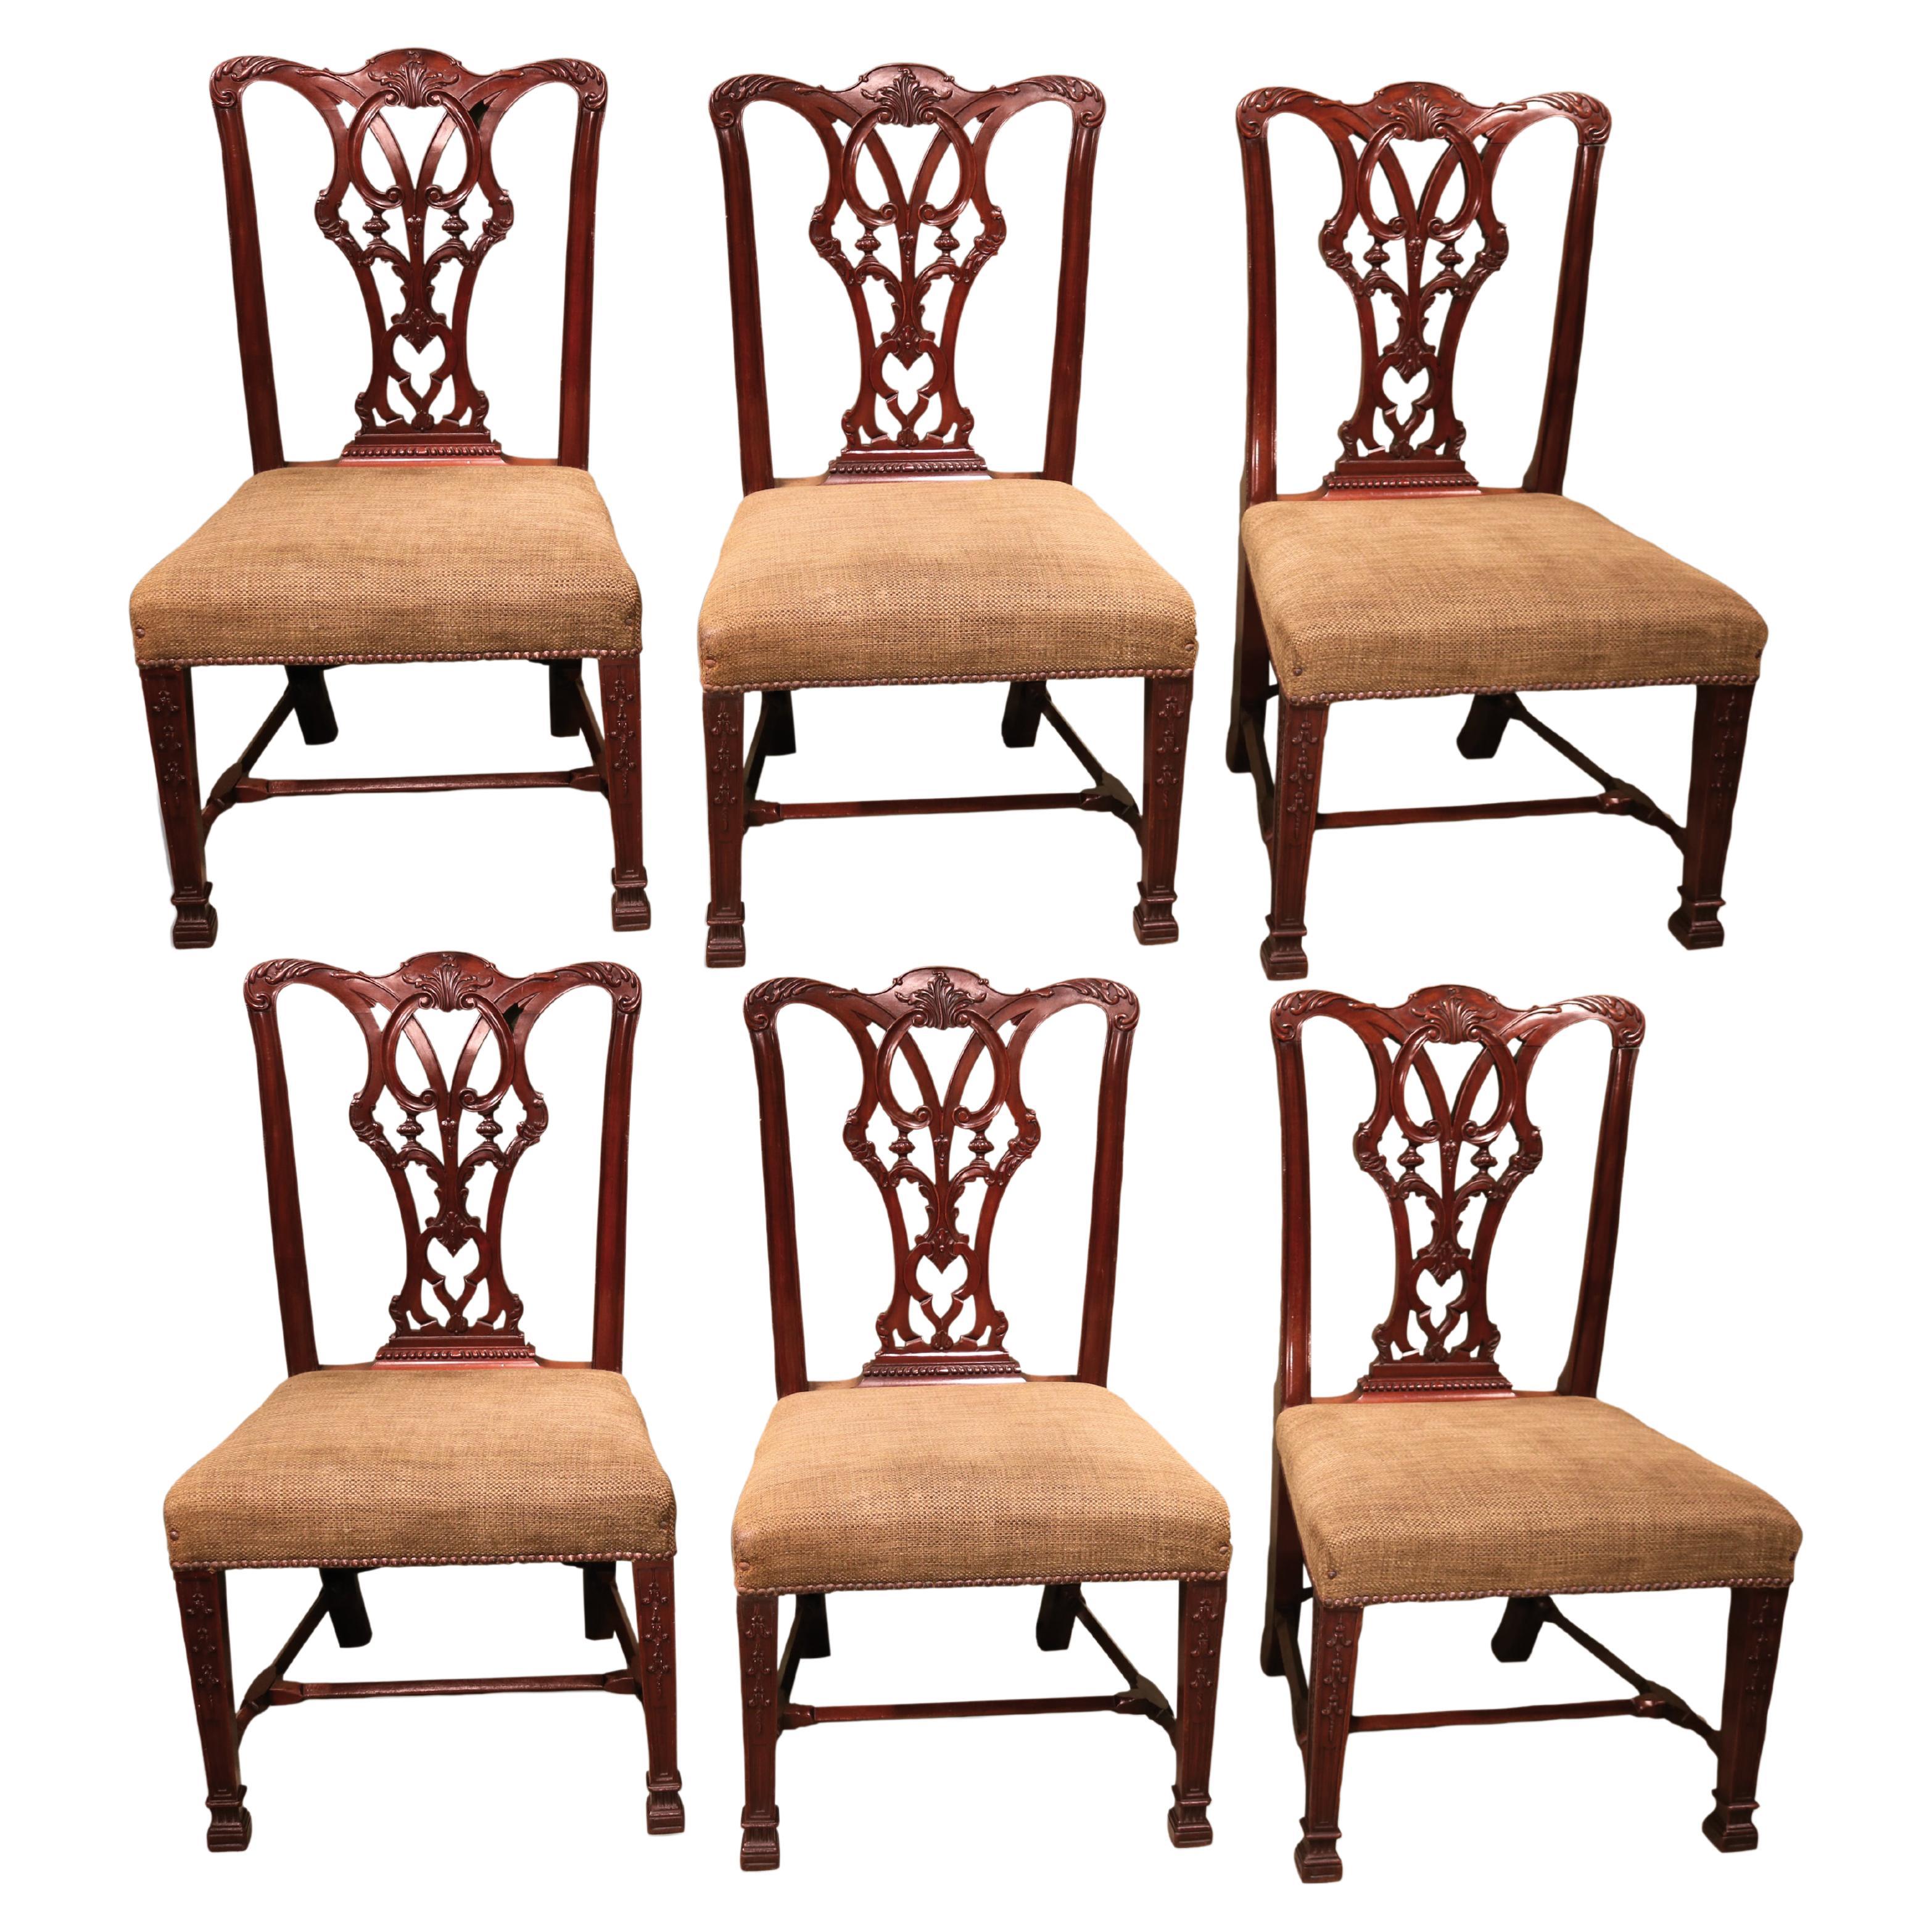 Set of Six 19th Century Chippendale Style Single Mahogany Chairs